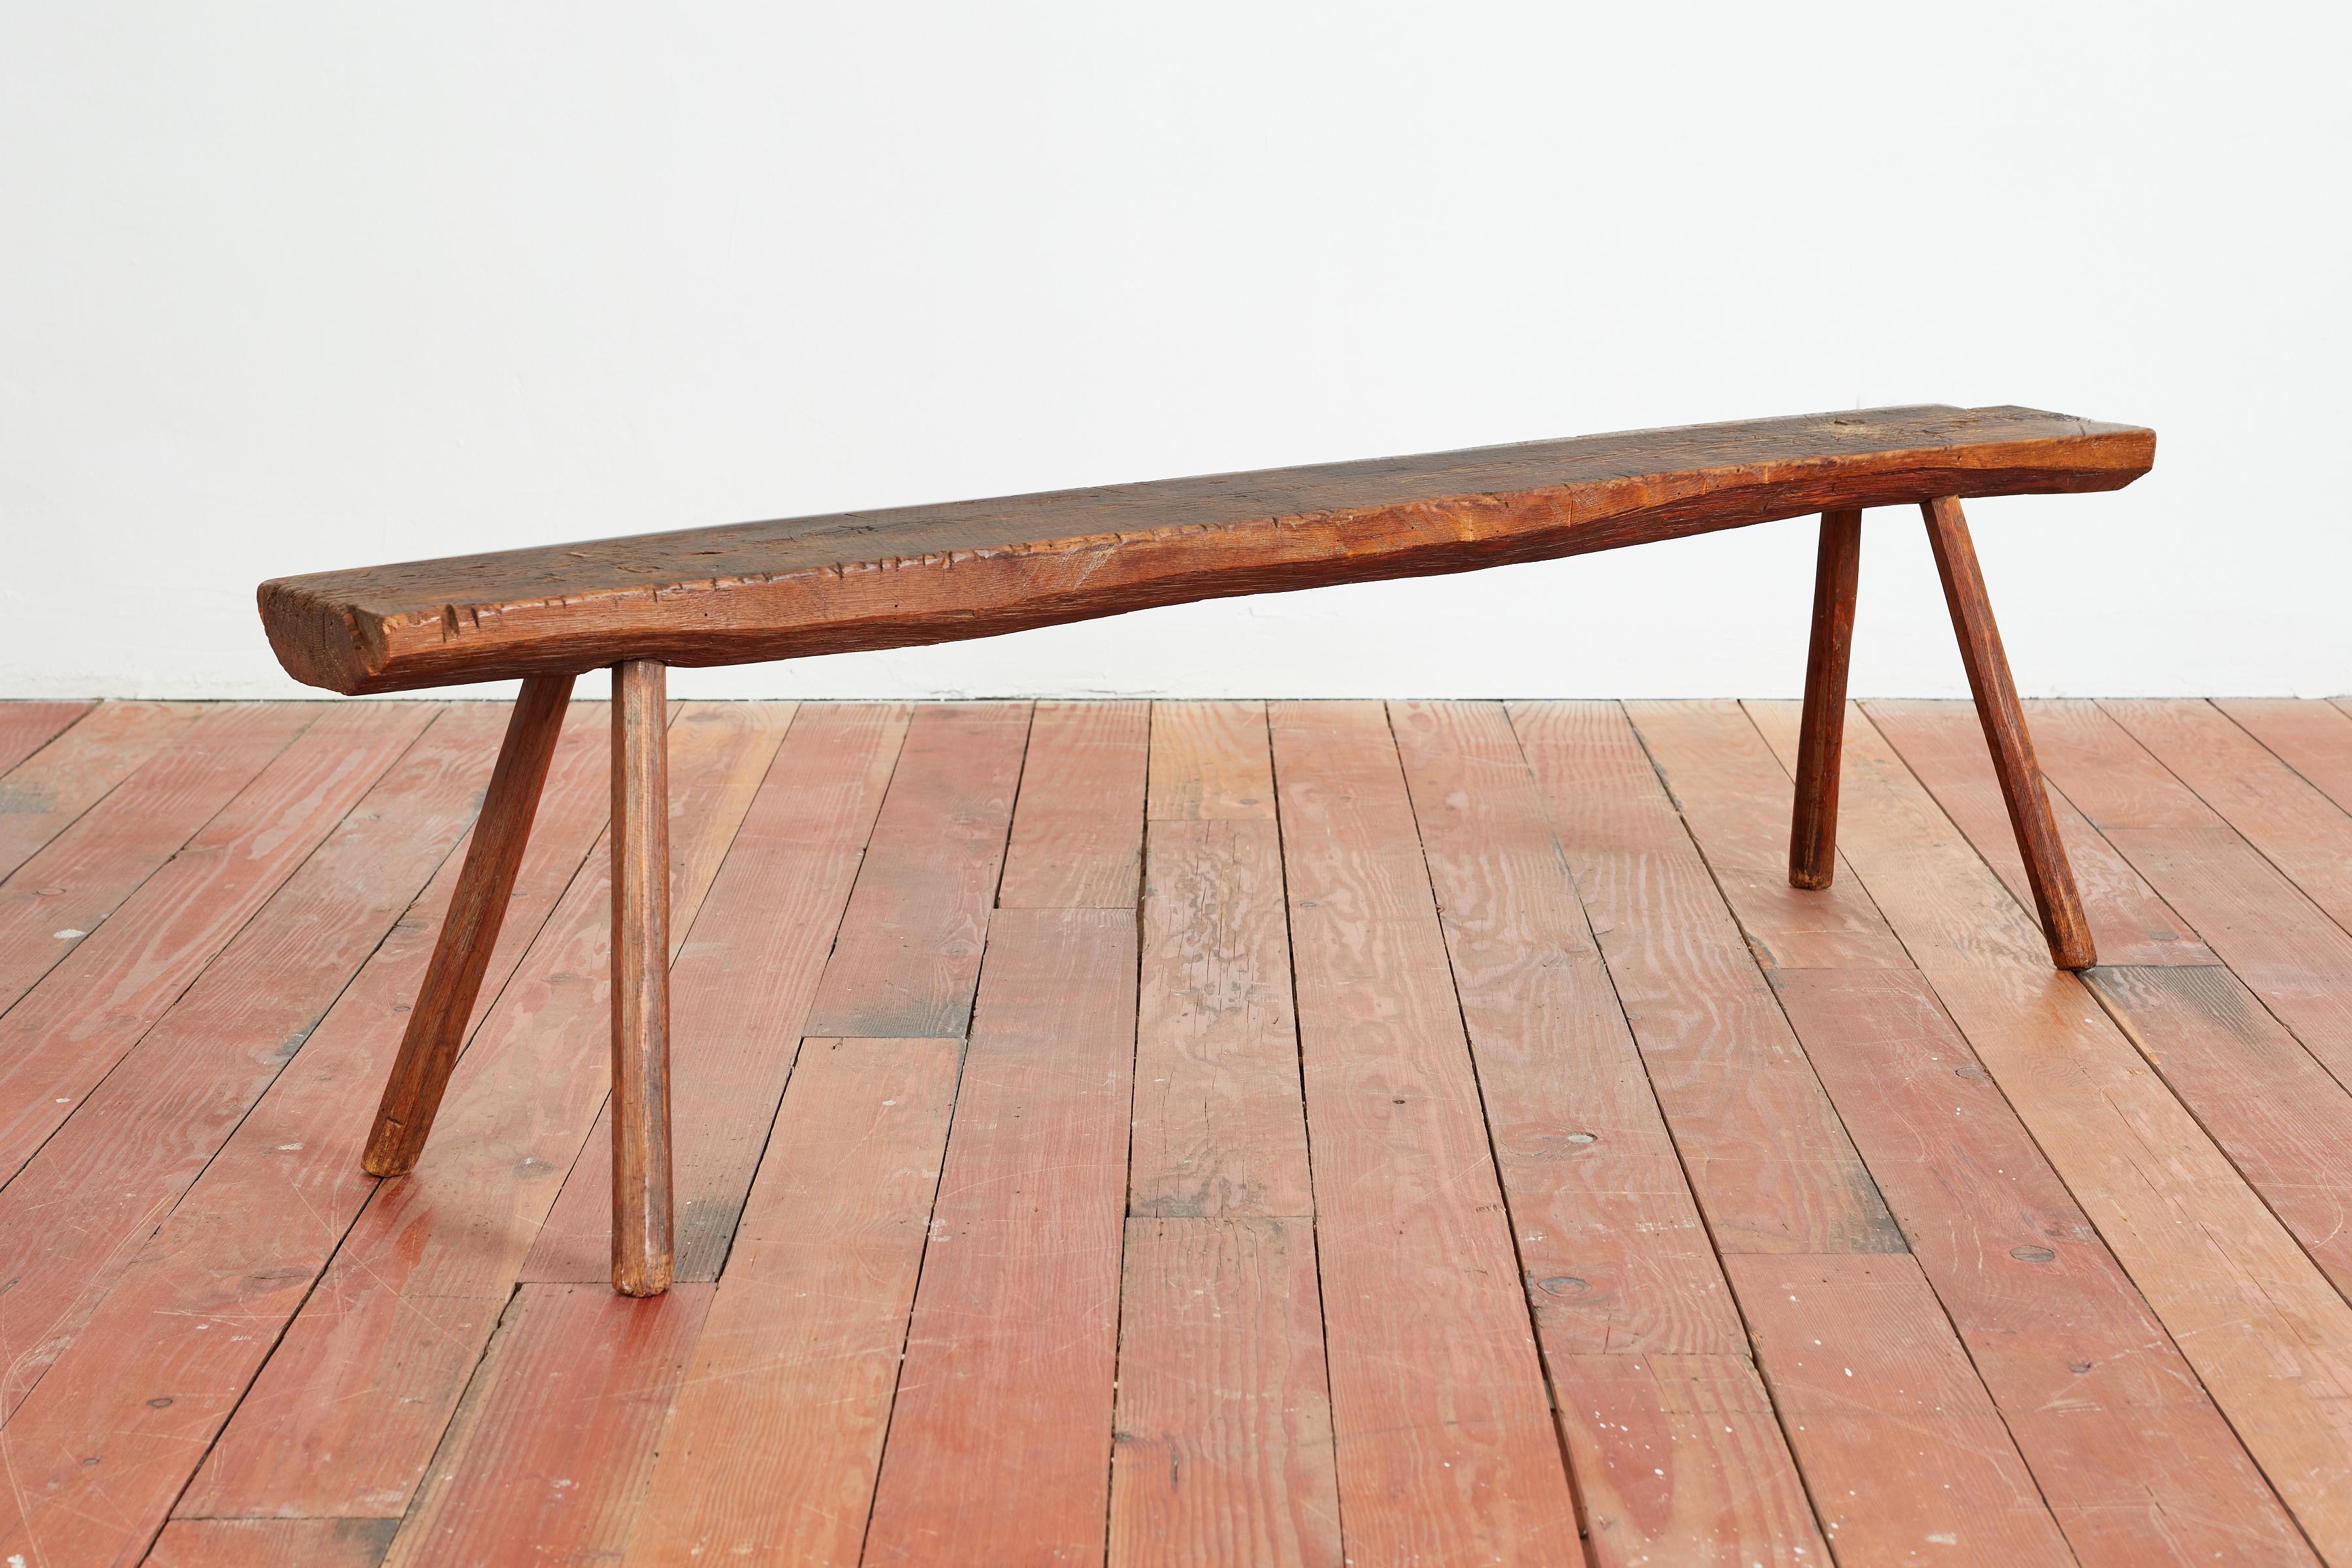 French primitive plank bench with wonderful patina. 
Simple and clean with joint detail. 